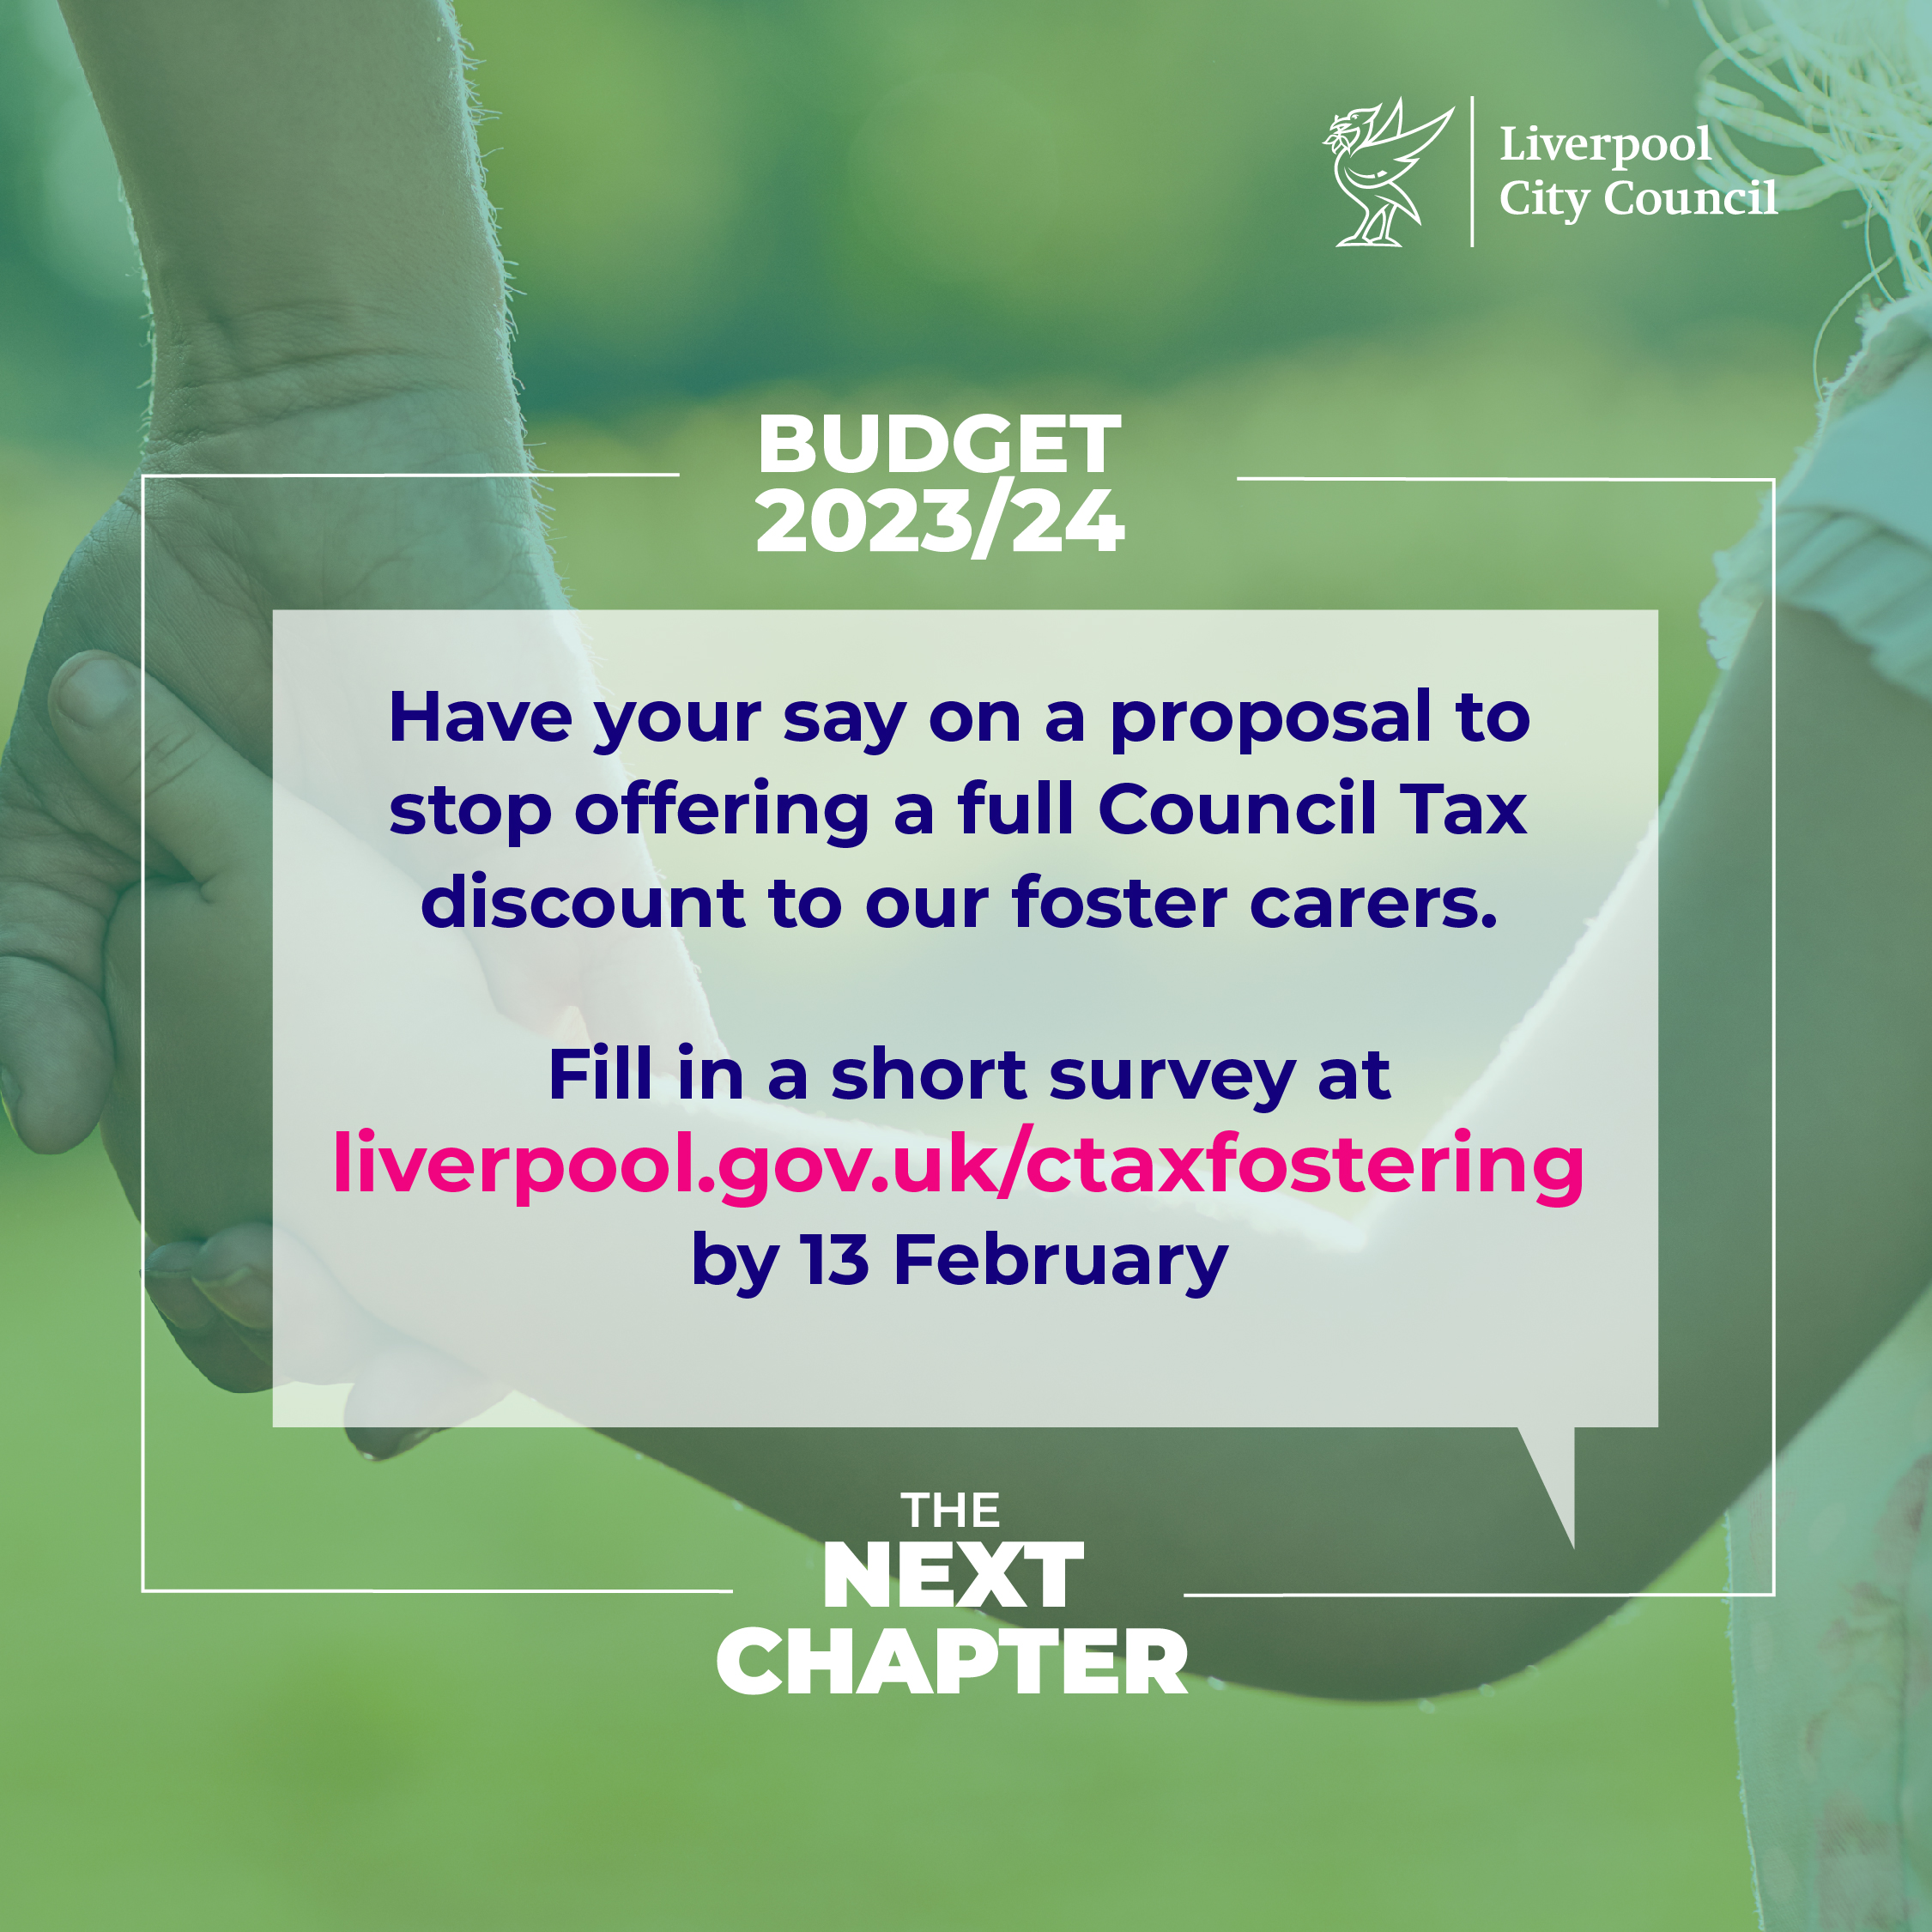 consultation-over-council-tax-relief-for-foster-carers-liverpool-express